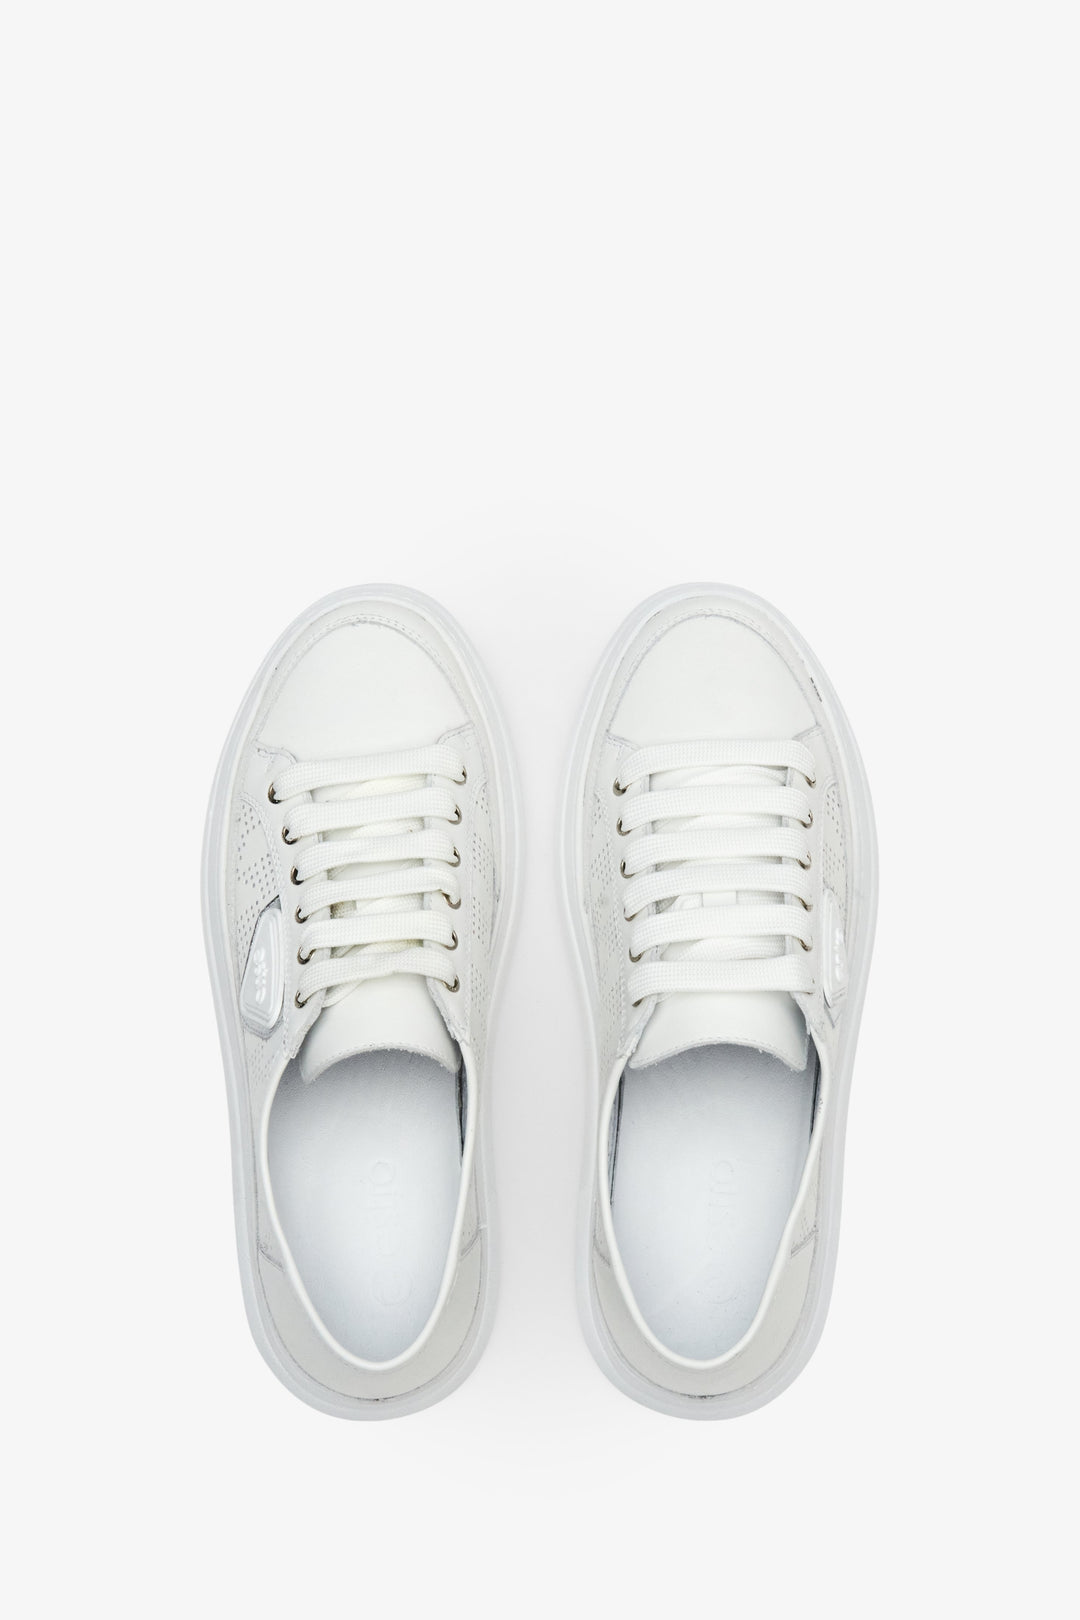 Women's white leather sneakers with laces - presentation of the footwear from the top.